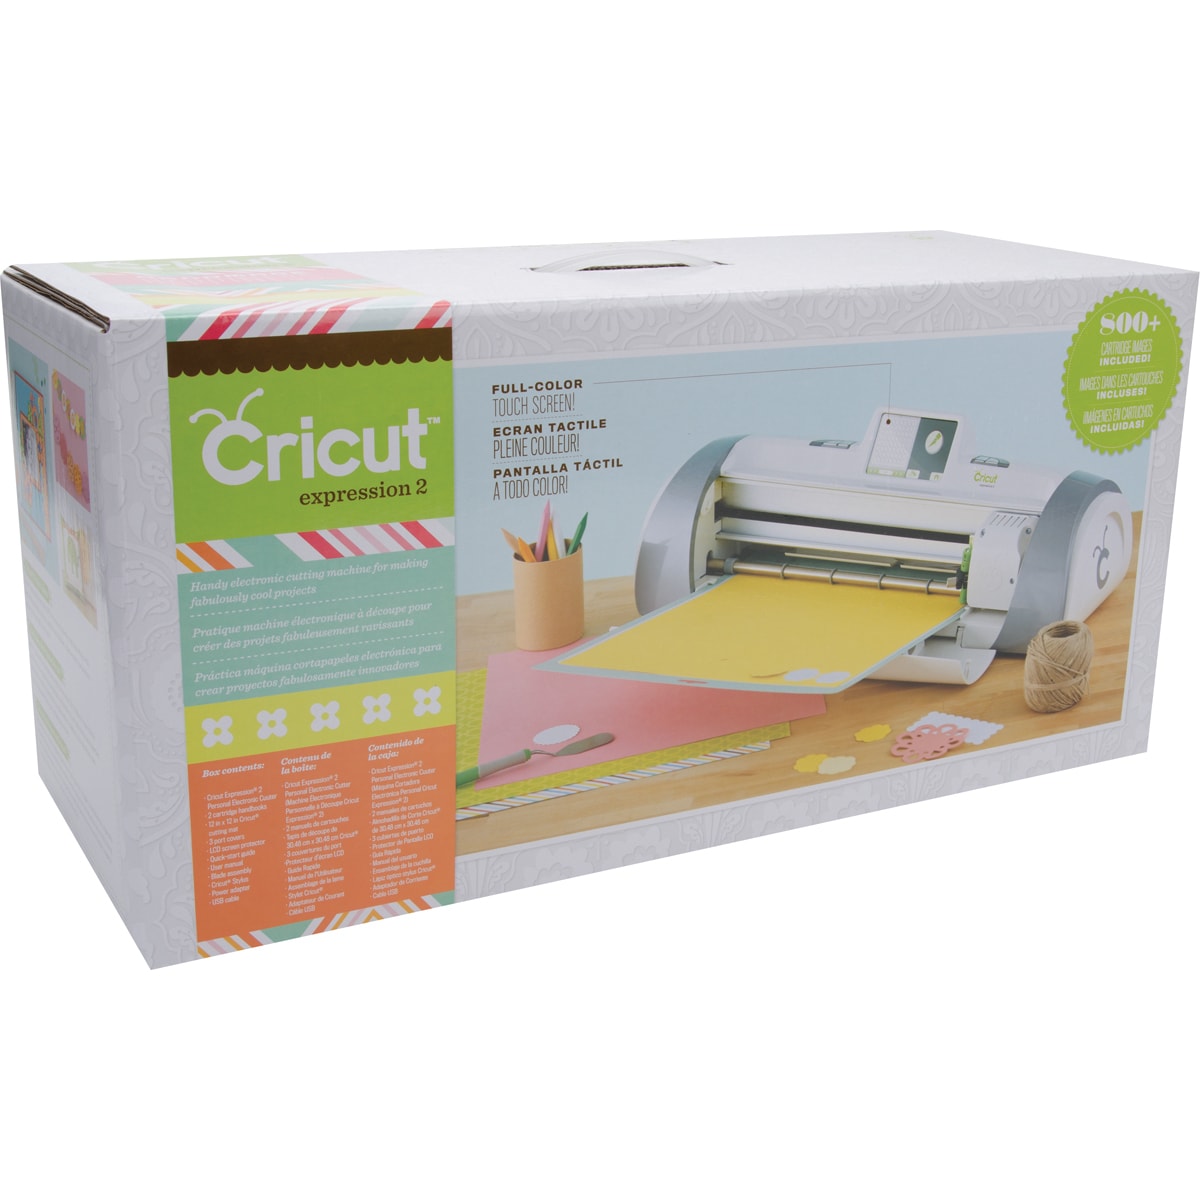 Best Cricut Expression Machine And Supplies for sale in Quincy